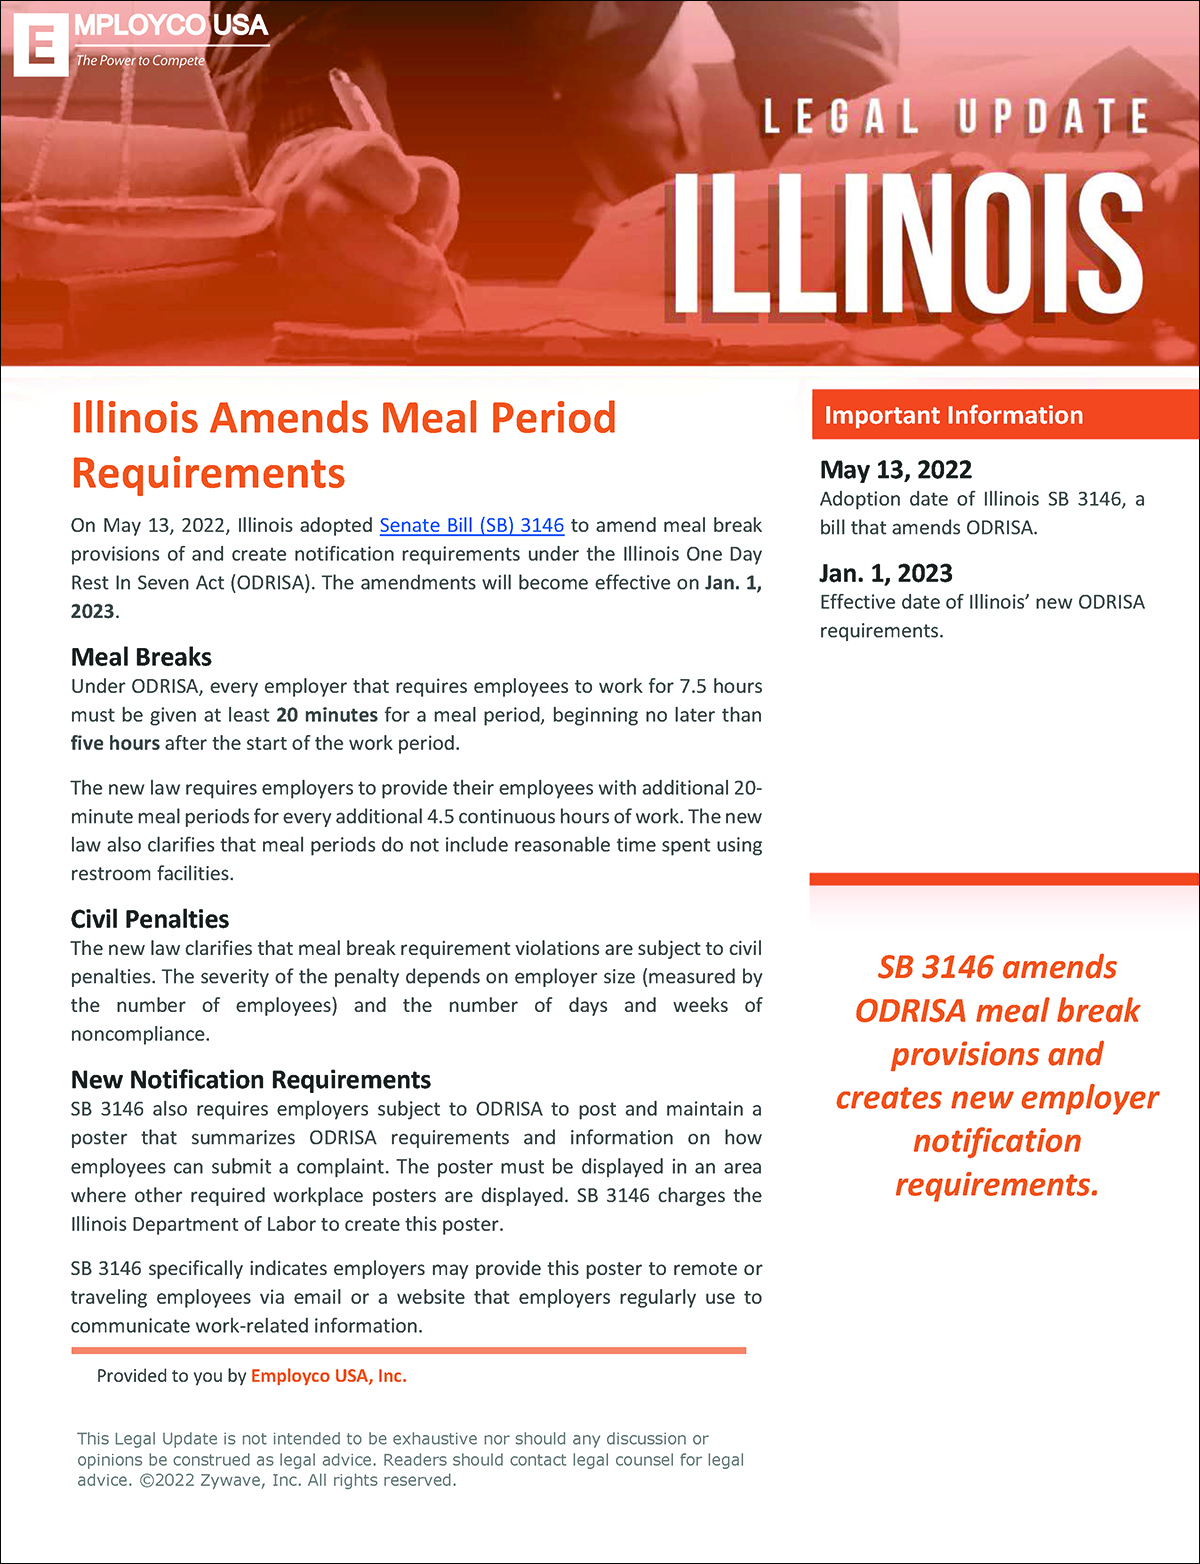 Illinois Amends Meal Period Requirements